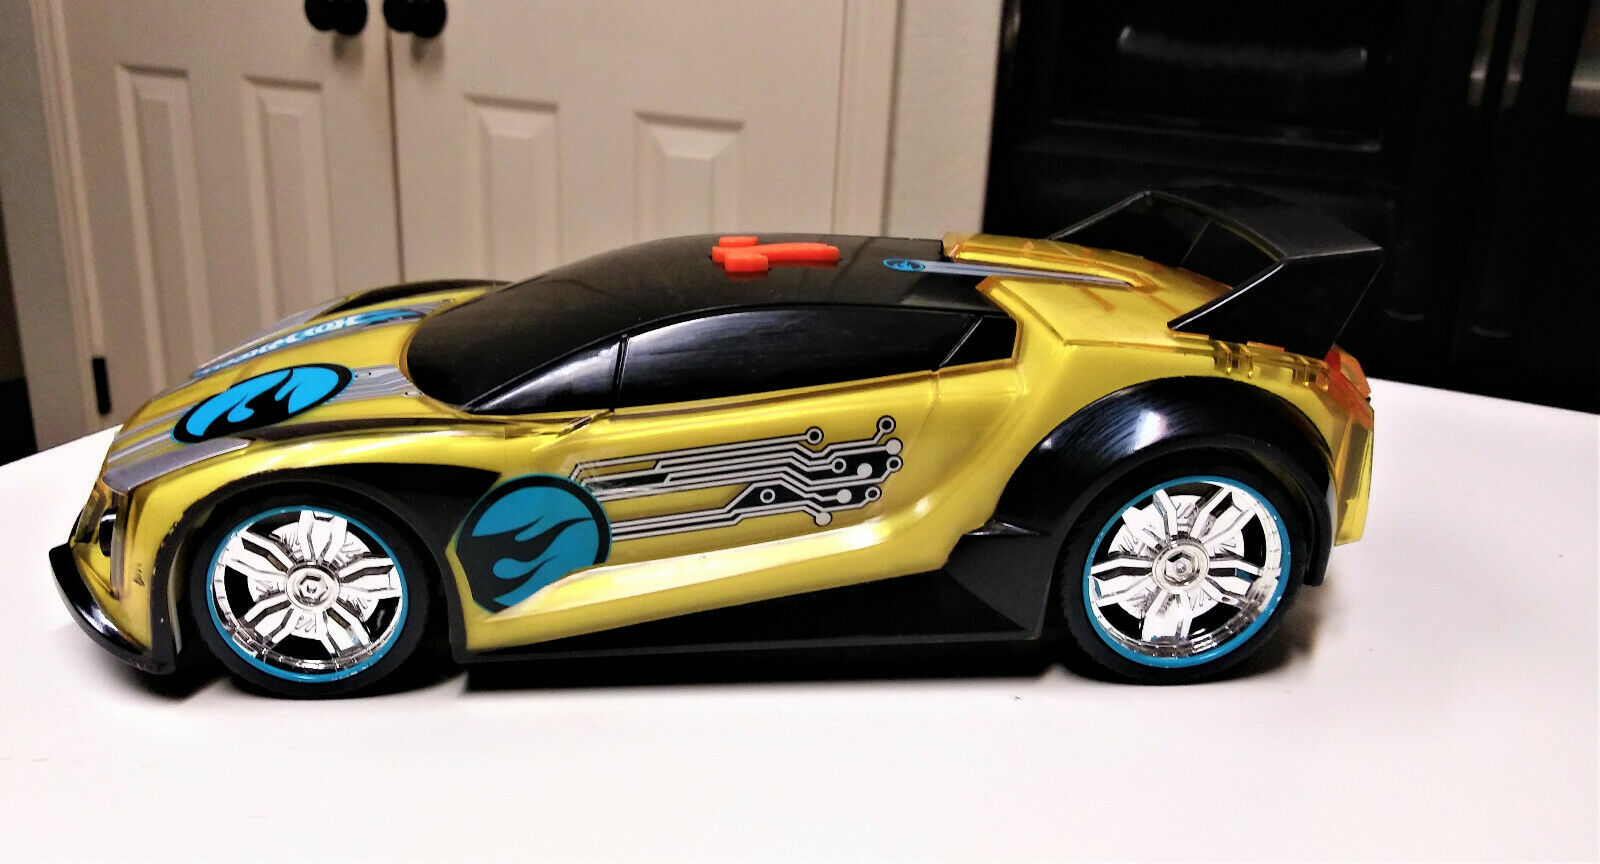 Hot Wheels Toy State 10" Hyper Racer With Flashing Lights And Sounds Yellow